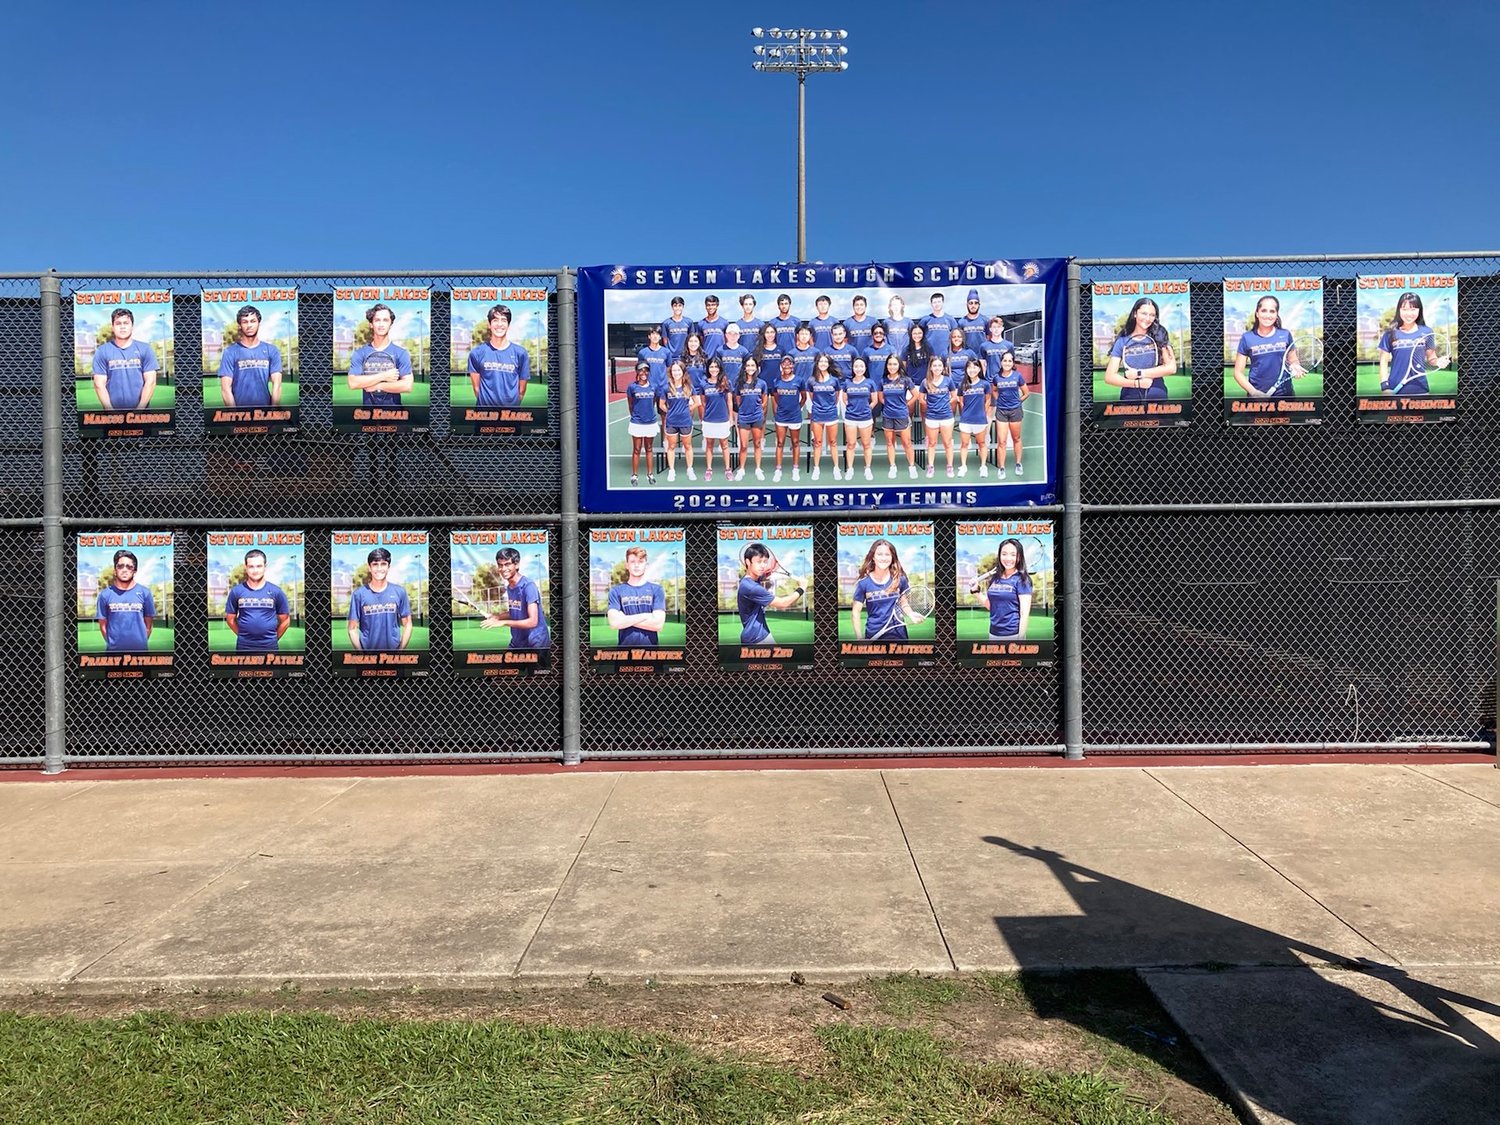 With a picture of the team and individual player photo banners that surround his team’s court on campus, Seven Lakes tennis coach Kevin McIlvain tweeted on his account late Friday evening: “Unfortunately, our season comes to an end from the sidelines in the Area Round due to the school being closed for matters out of our control. Thanks for your hard work and doing things the right way Spartan Tennis!”